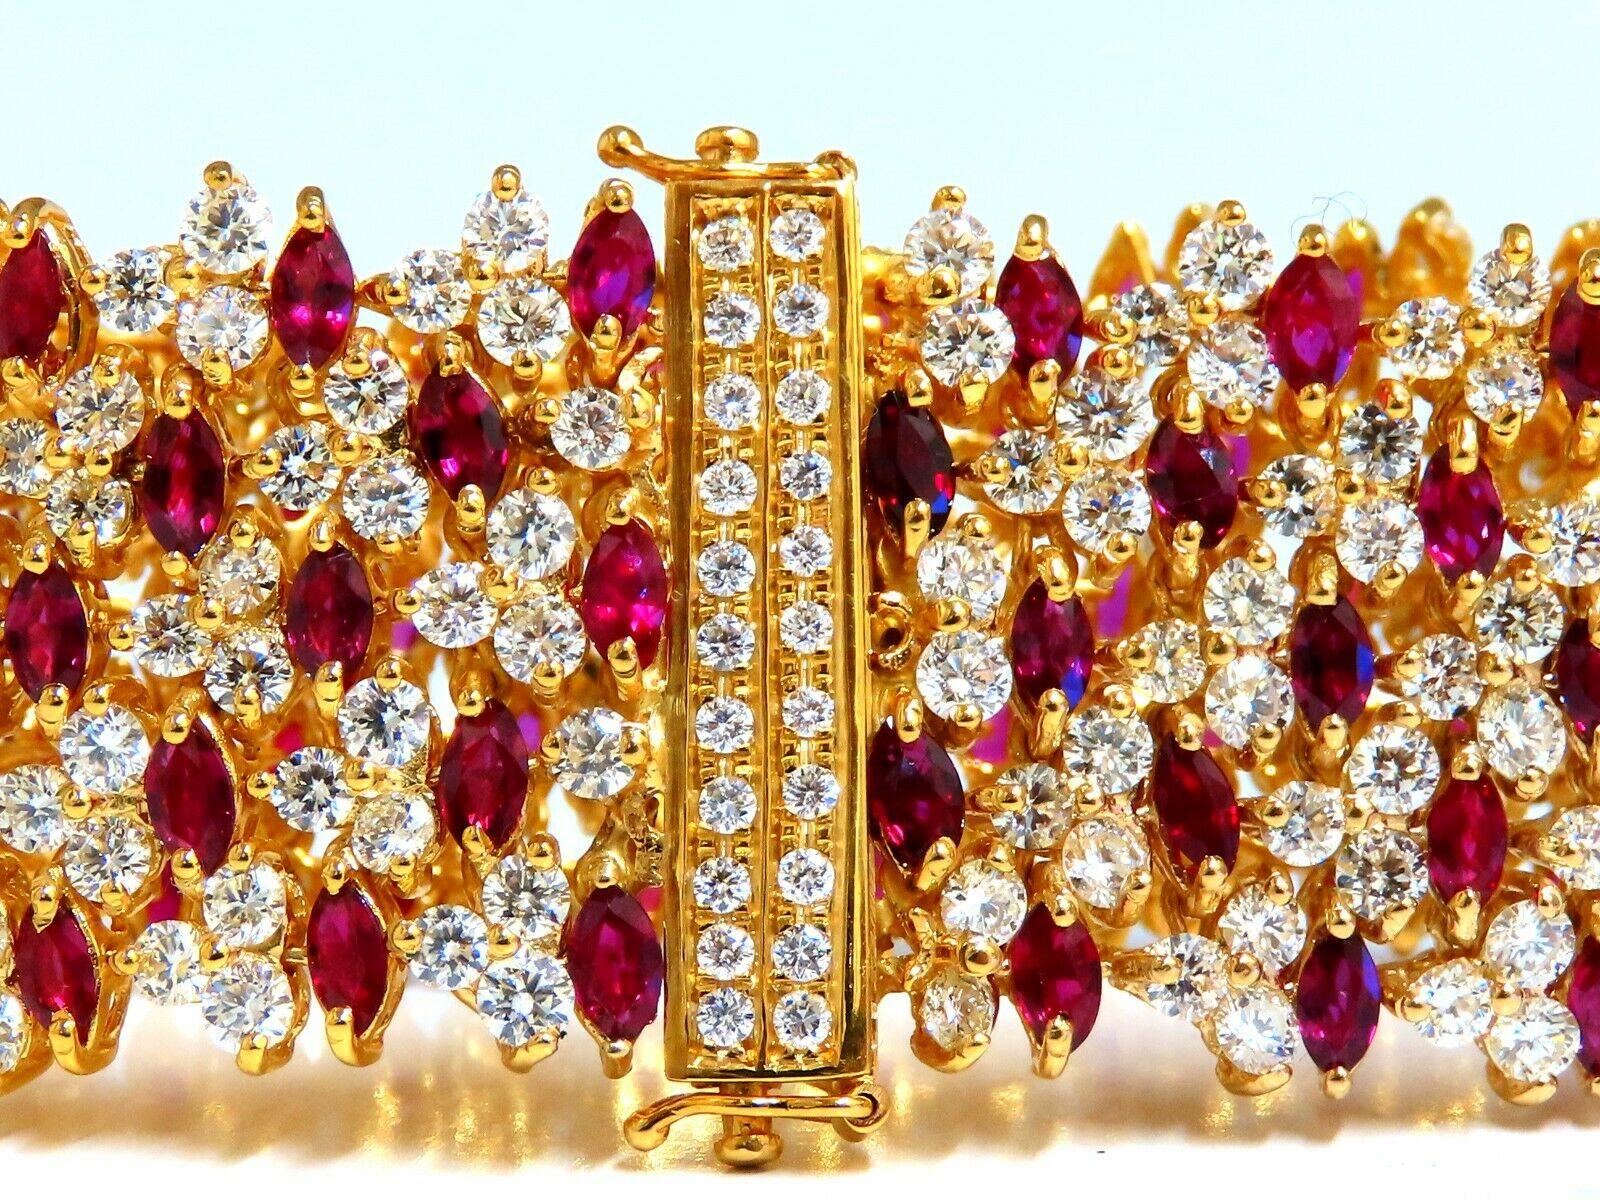 Ruby Diamond Cluster Line Cuff Bracelet

20.12ct. Natural Marquise Rubies.

Marquise, full cuts 

Clean clarity

Transparent & Vivid Reds.

Average 5 x 3mm each

Mix of Heated & Non Heated Rubies.

24.46ct Natural Diamonds

Rounds & full cuts

Vs-2